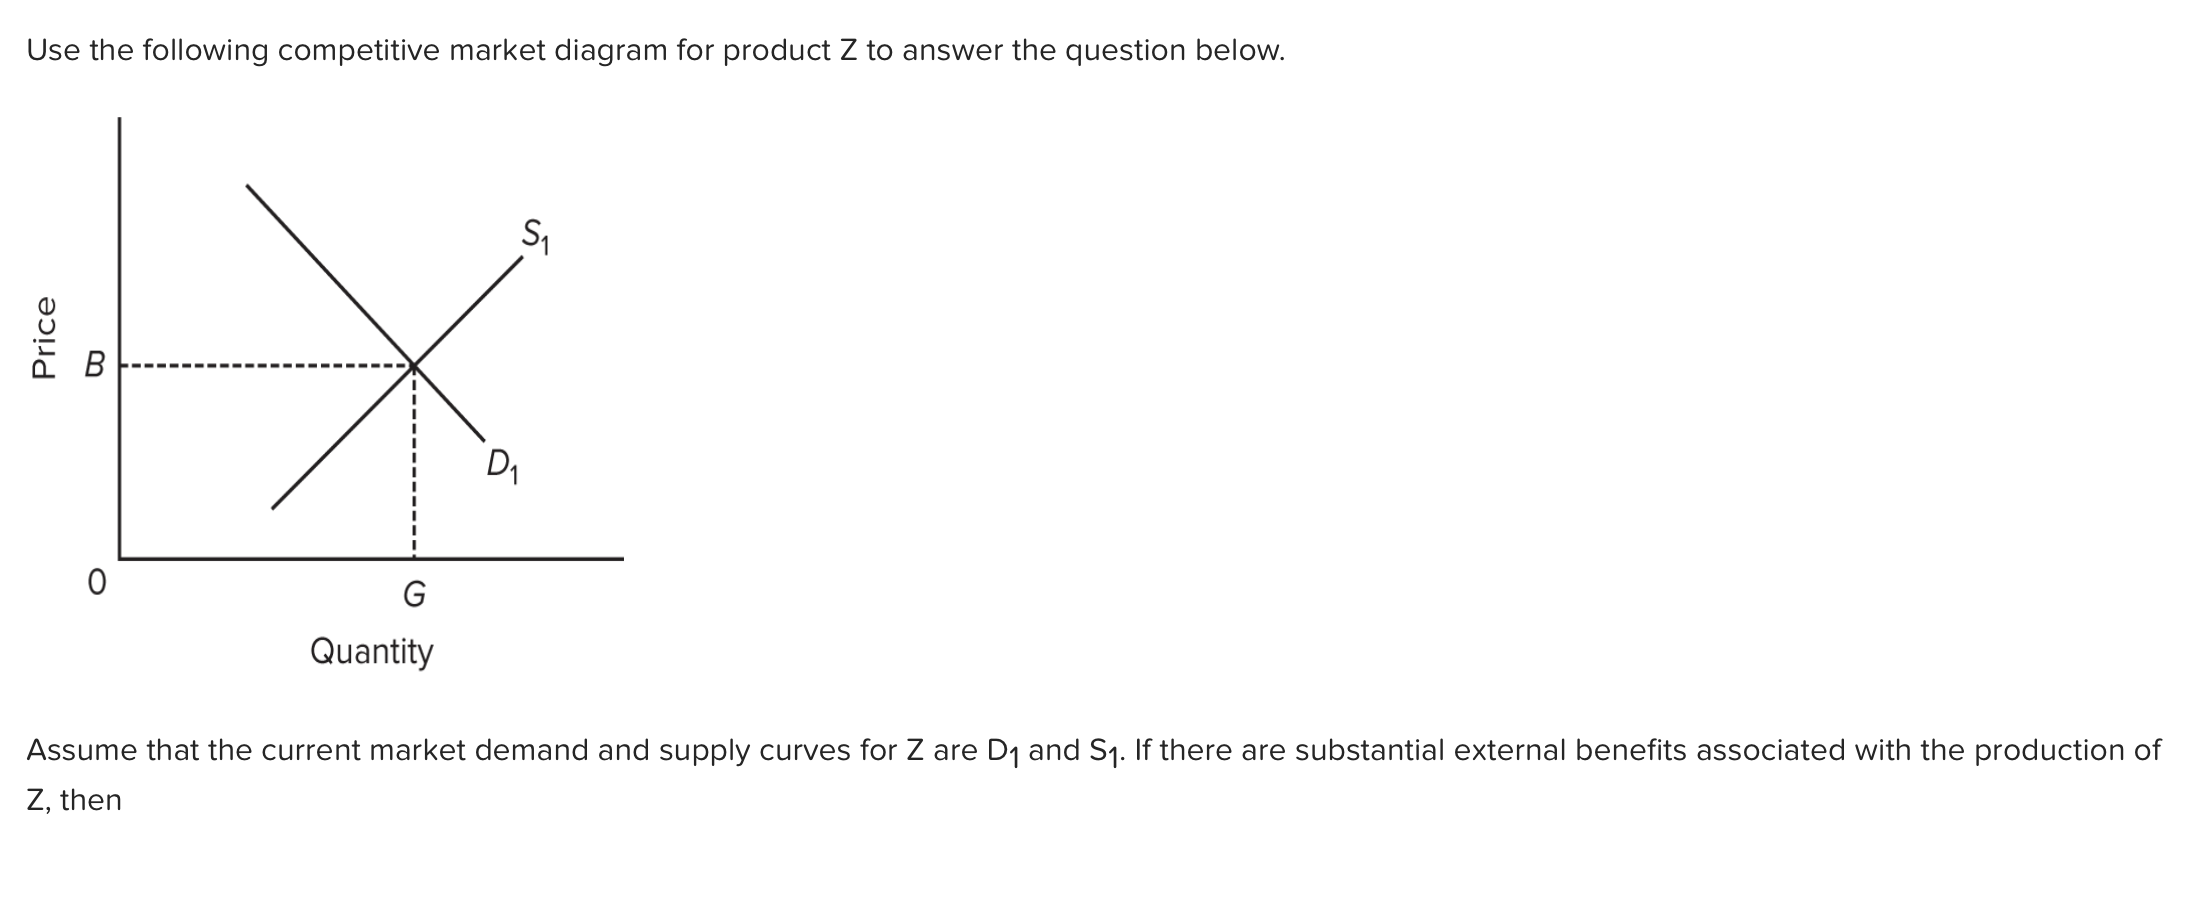 Use the following competitive market diagram for product Z to answer the question below.
B
D1
10
G
Quantity
Assume that the current market demand and supply curves for Z are
D1 and S1. If there are substantial external benefits associated with the production of
Z, then
Price
